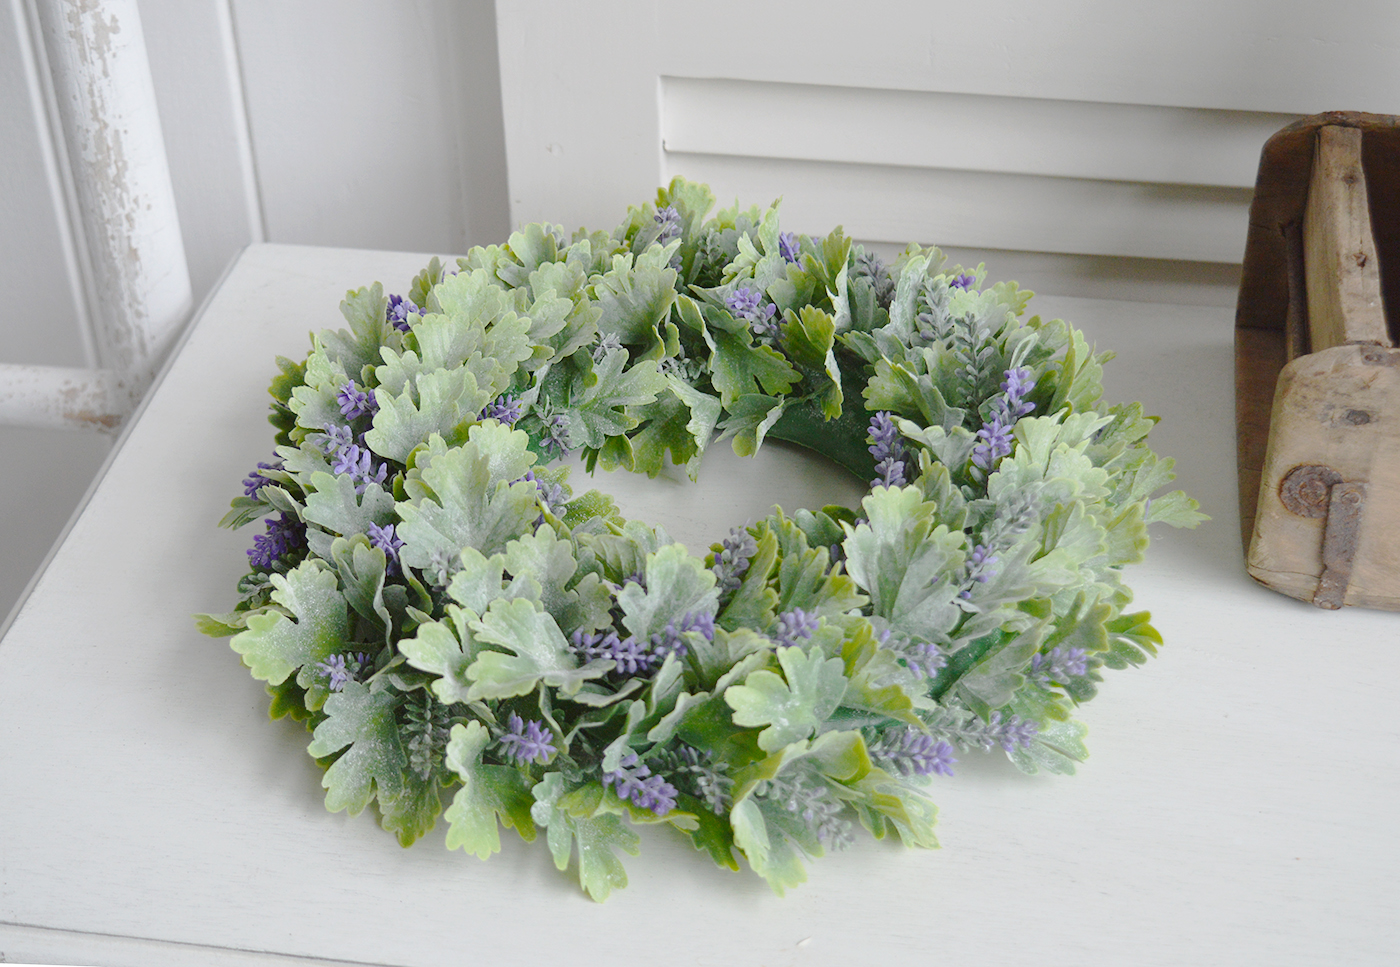 Lavender Wreath for a traditional New England look to your room from The White Lighthouse Furniture for the hallway, living room, bedroom and bathroom. New England coastal, country and farmhouse interiors